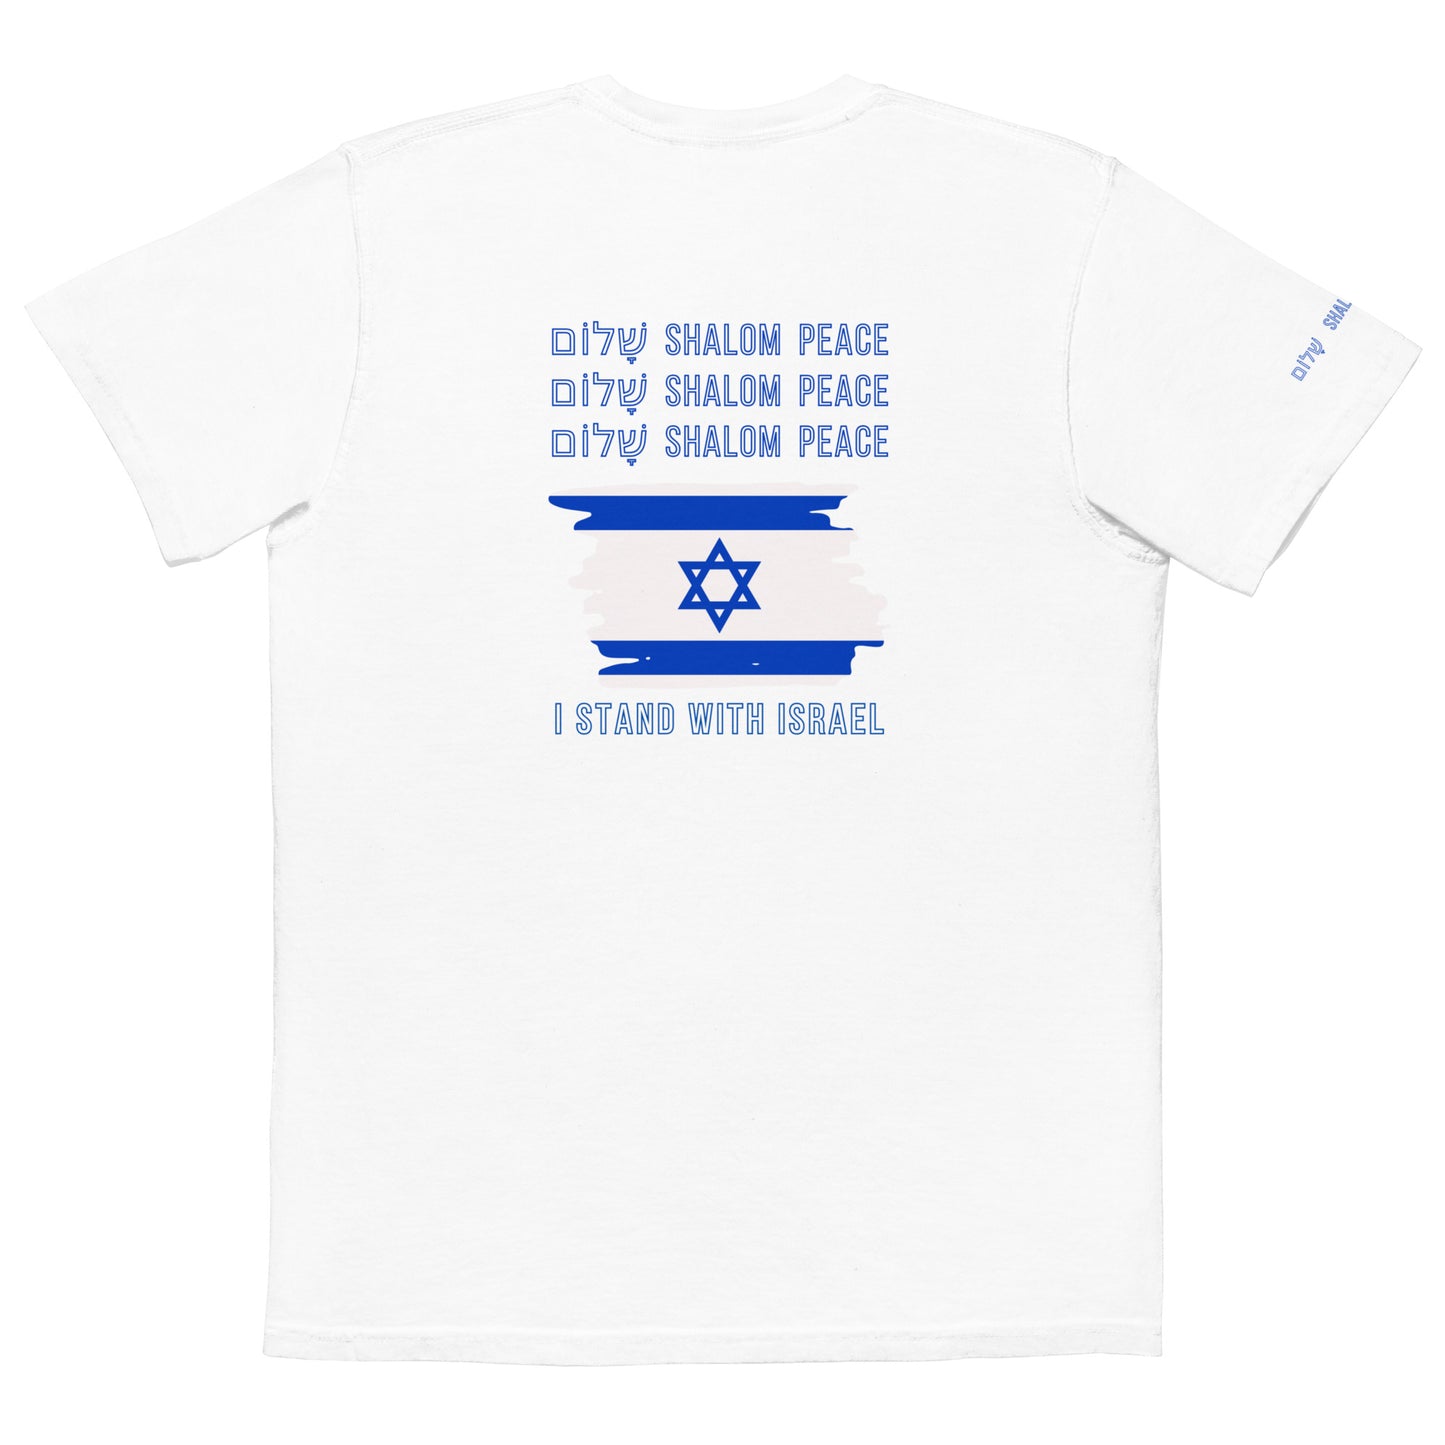 I STAND WITH ISRAEL: Unisex garment-dyed pocket t-shirt